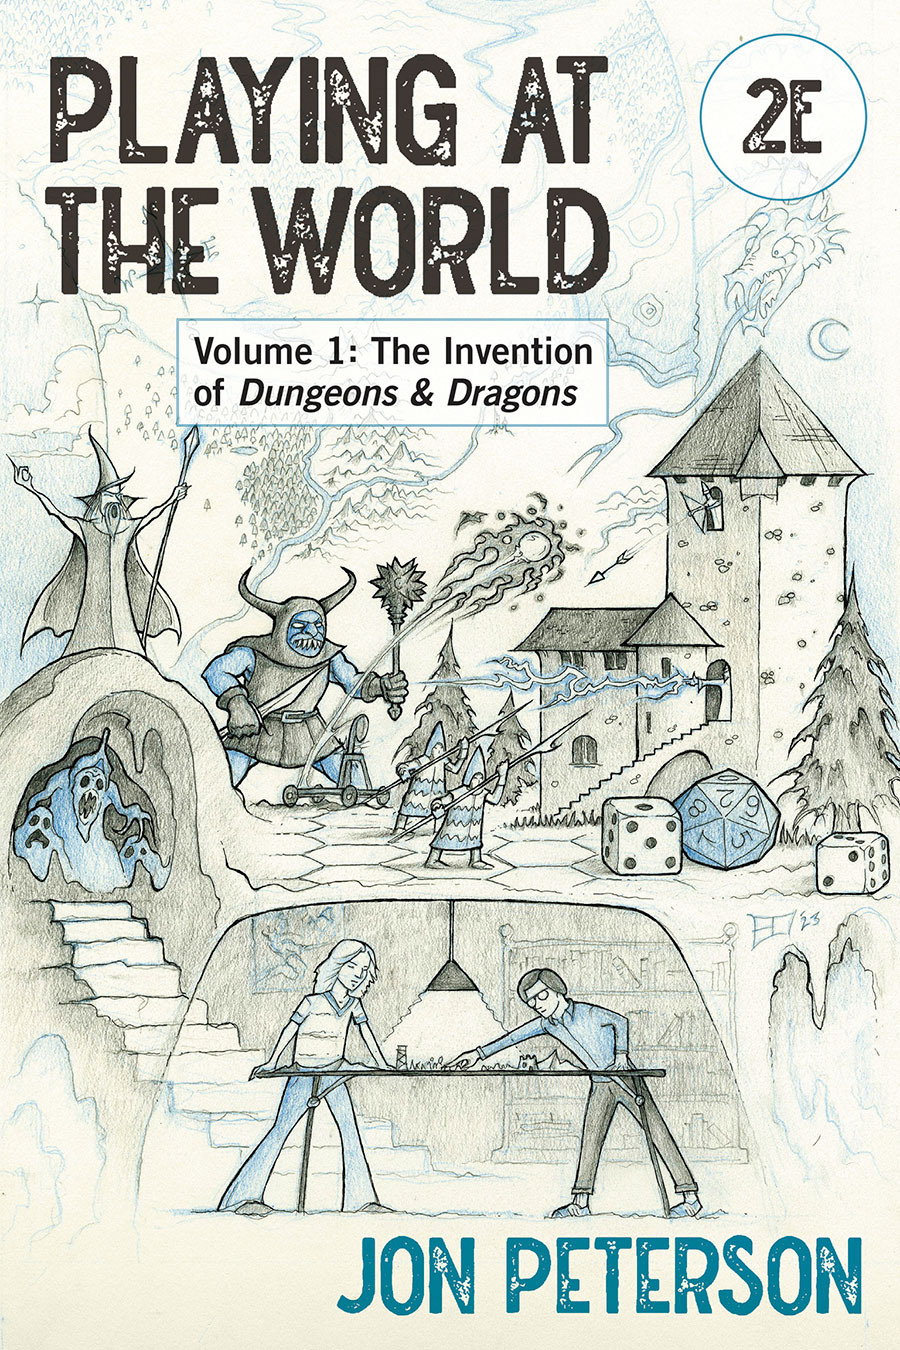 Playing At The World 2E Vol 1 The Invention Of Dungeons & Dragons TP